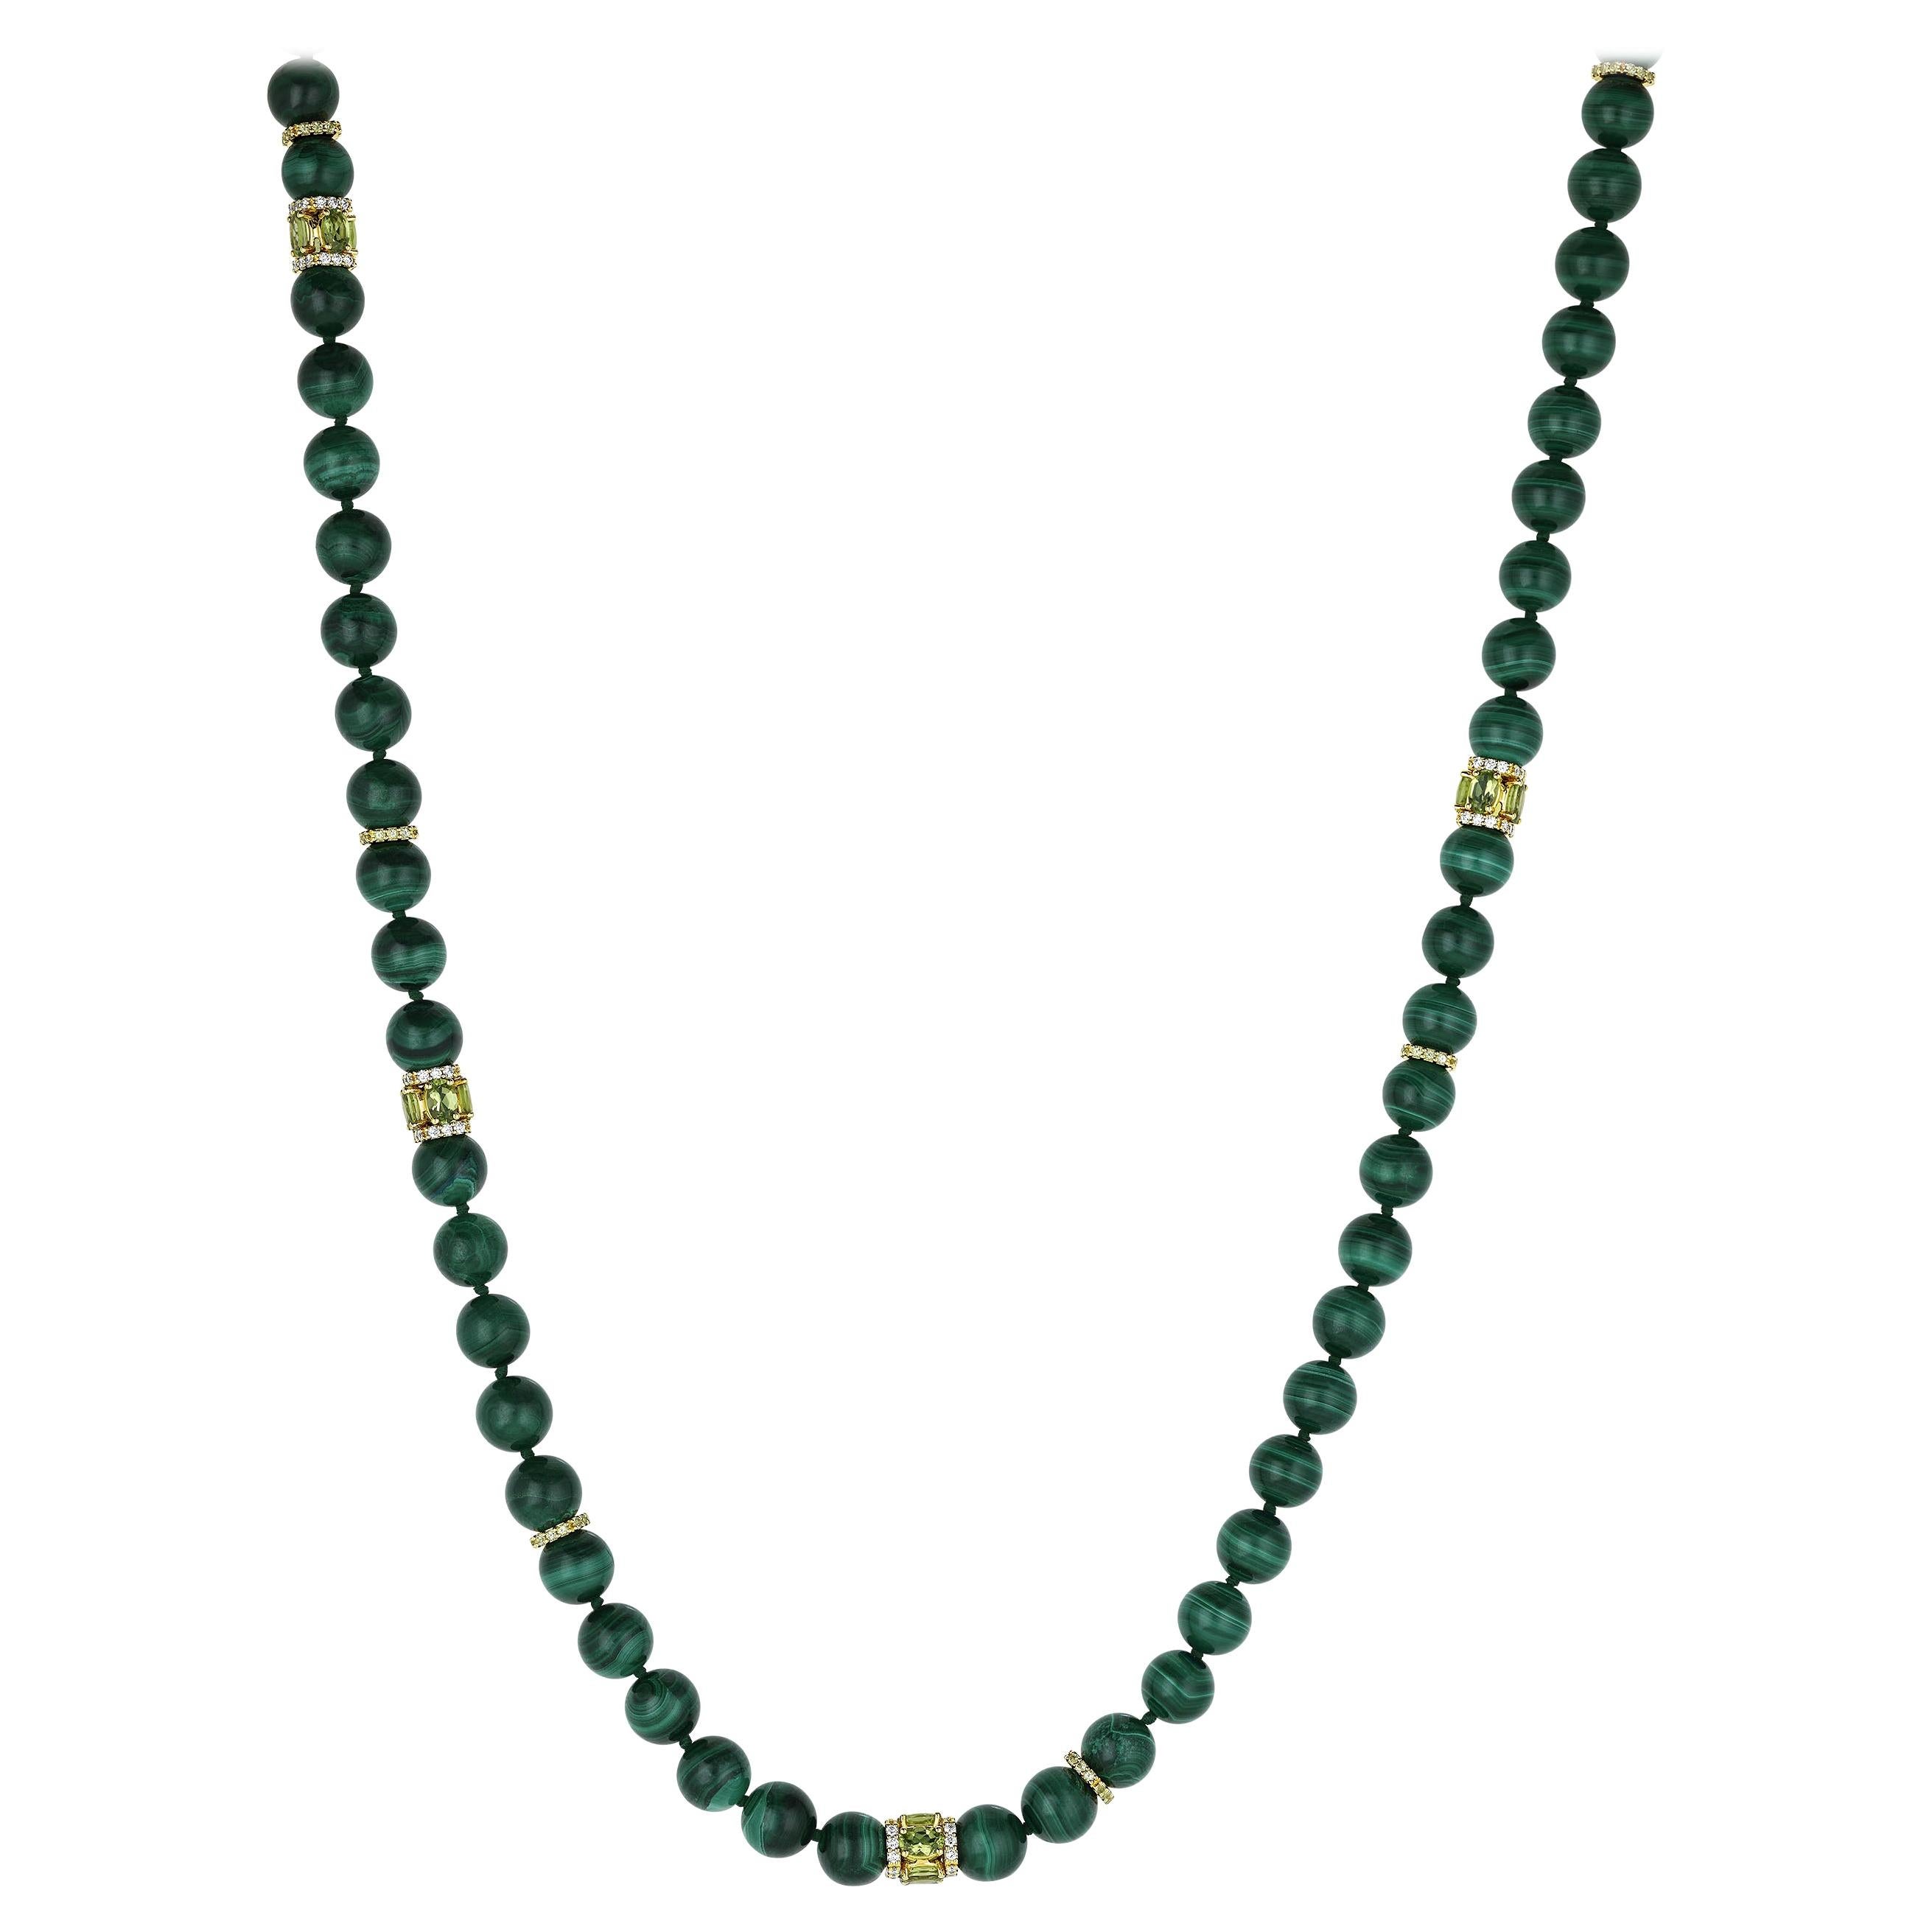 Necklace with Malachite Beads, 18k Yellow Gold, White Diamonds, and Peridot For Sale